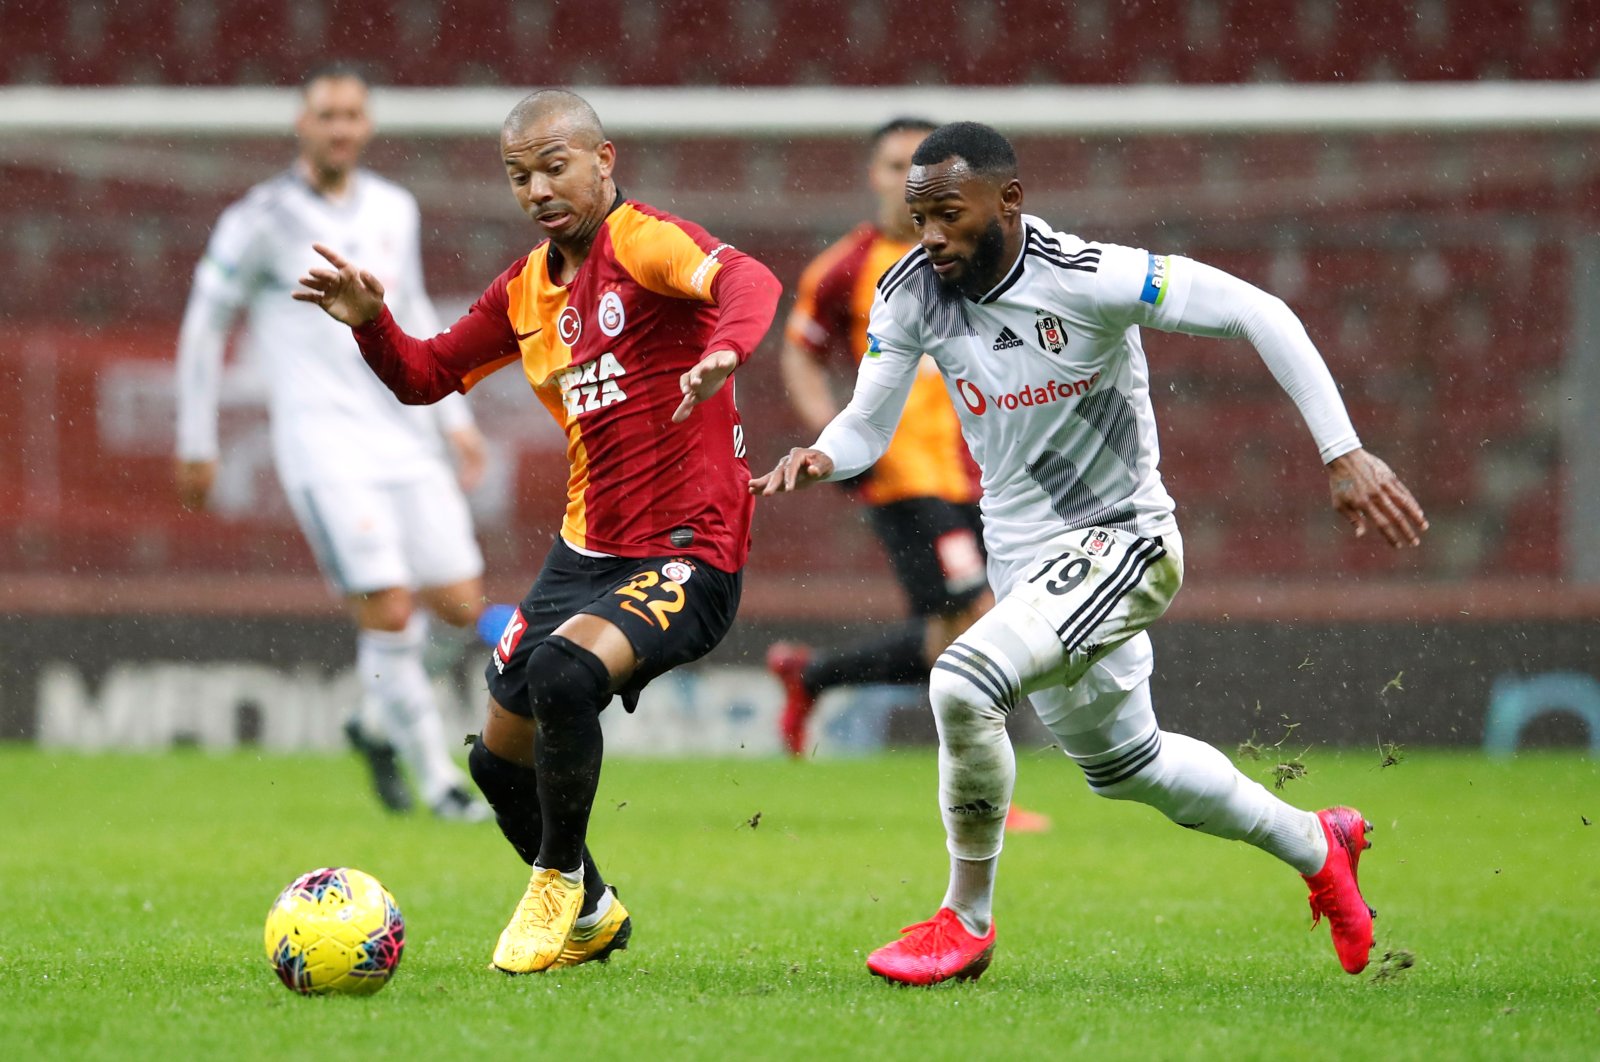 Galatasaray's Mariano in action with Besiktaş's Georges-Kevin Nkoudou during a Süper Lig Match in Istanbul, March 15, 2020. (Reuters Photo)